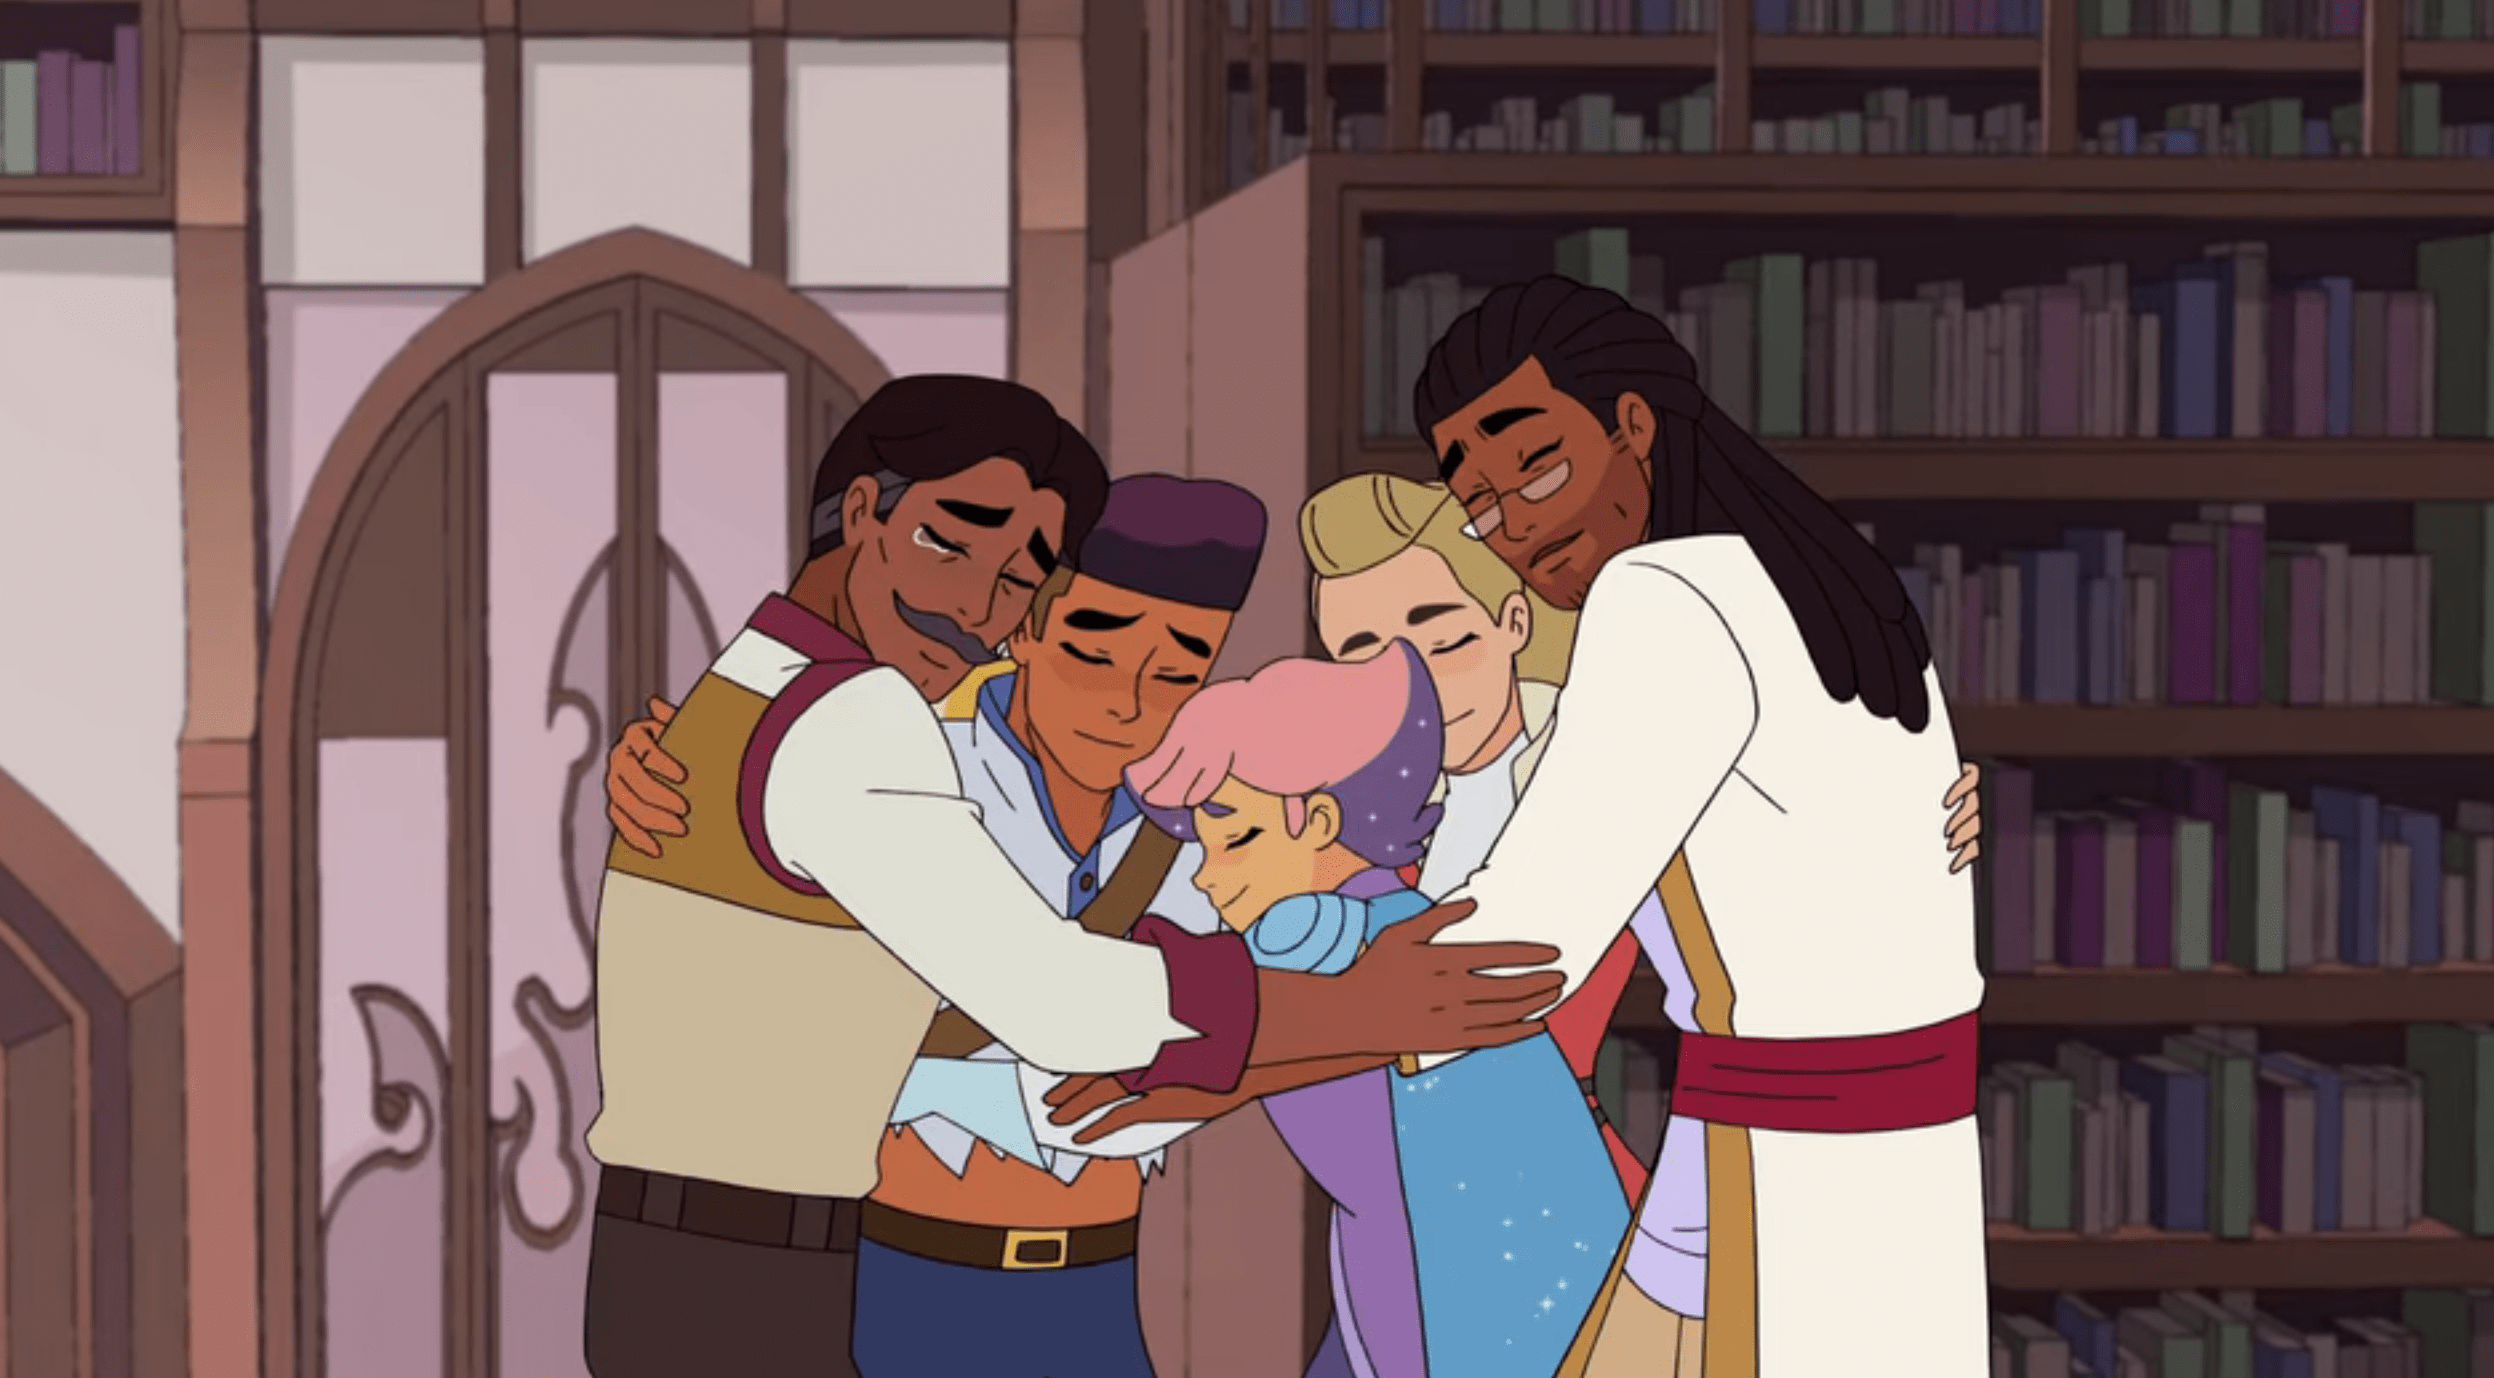 Bow, his friends, and his dads get into a group hug after Bow admits he doesn't want to be a librarian.